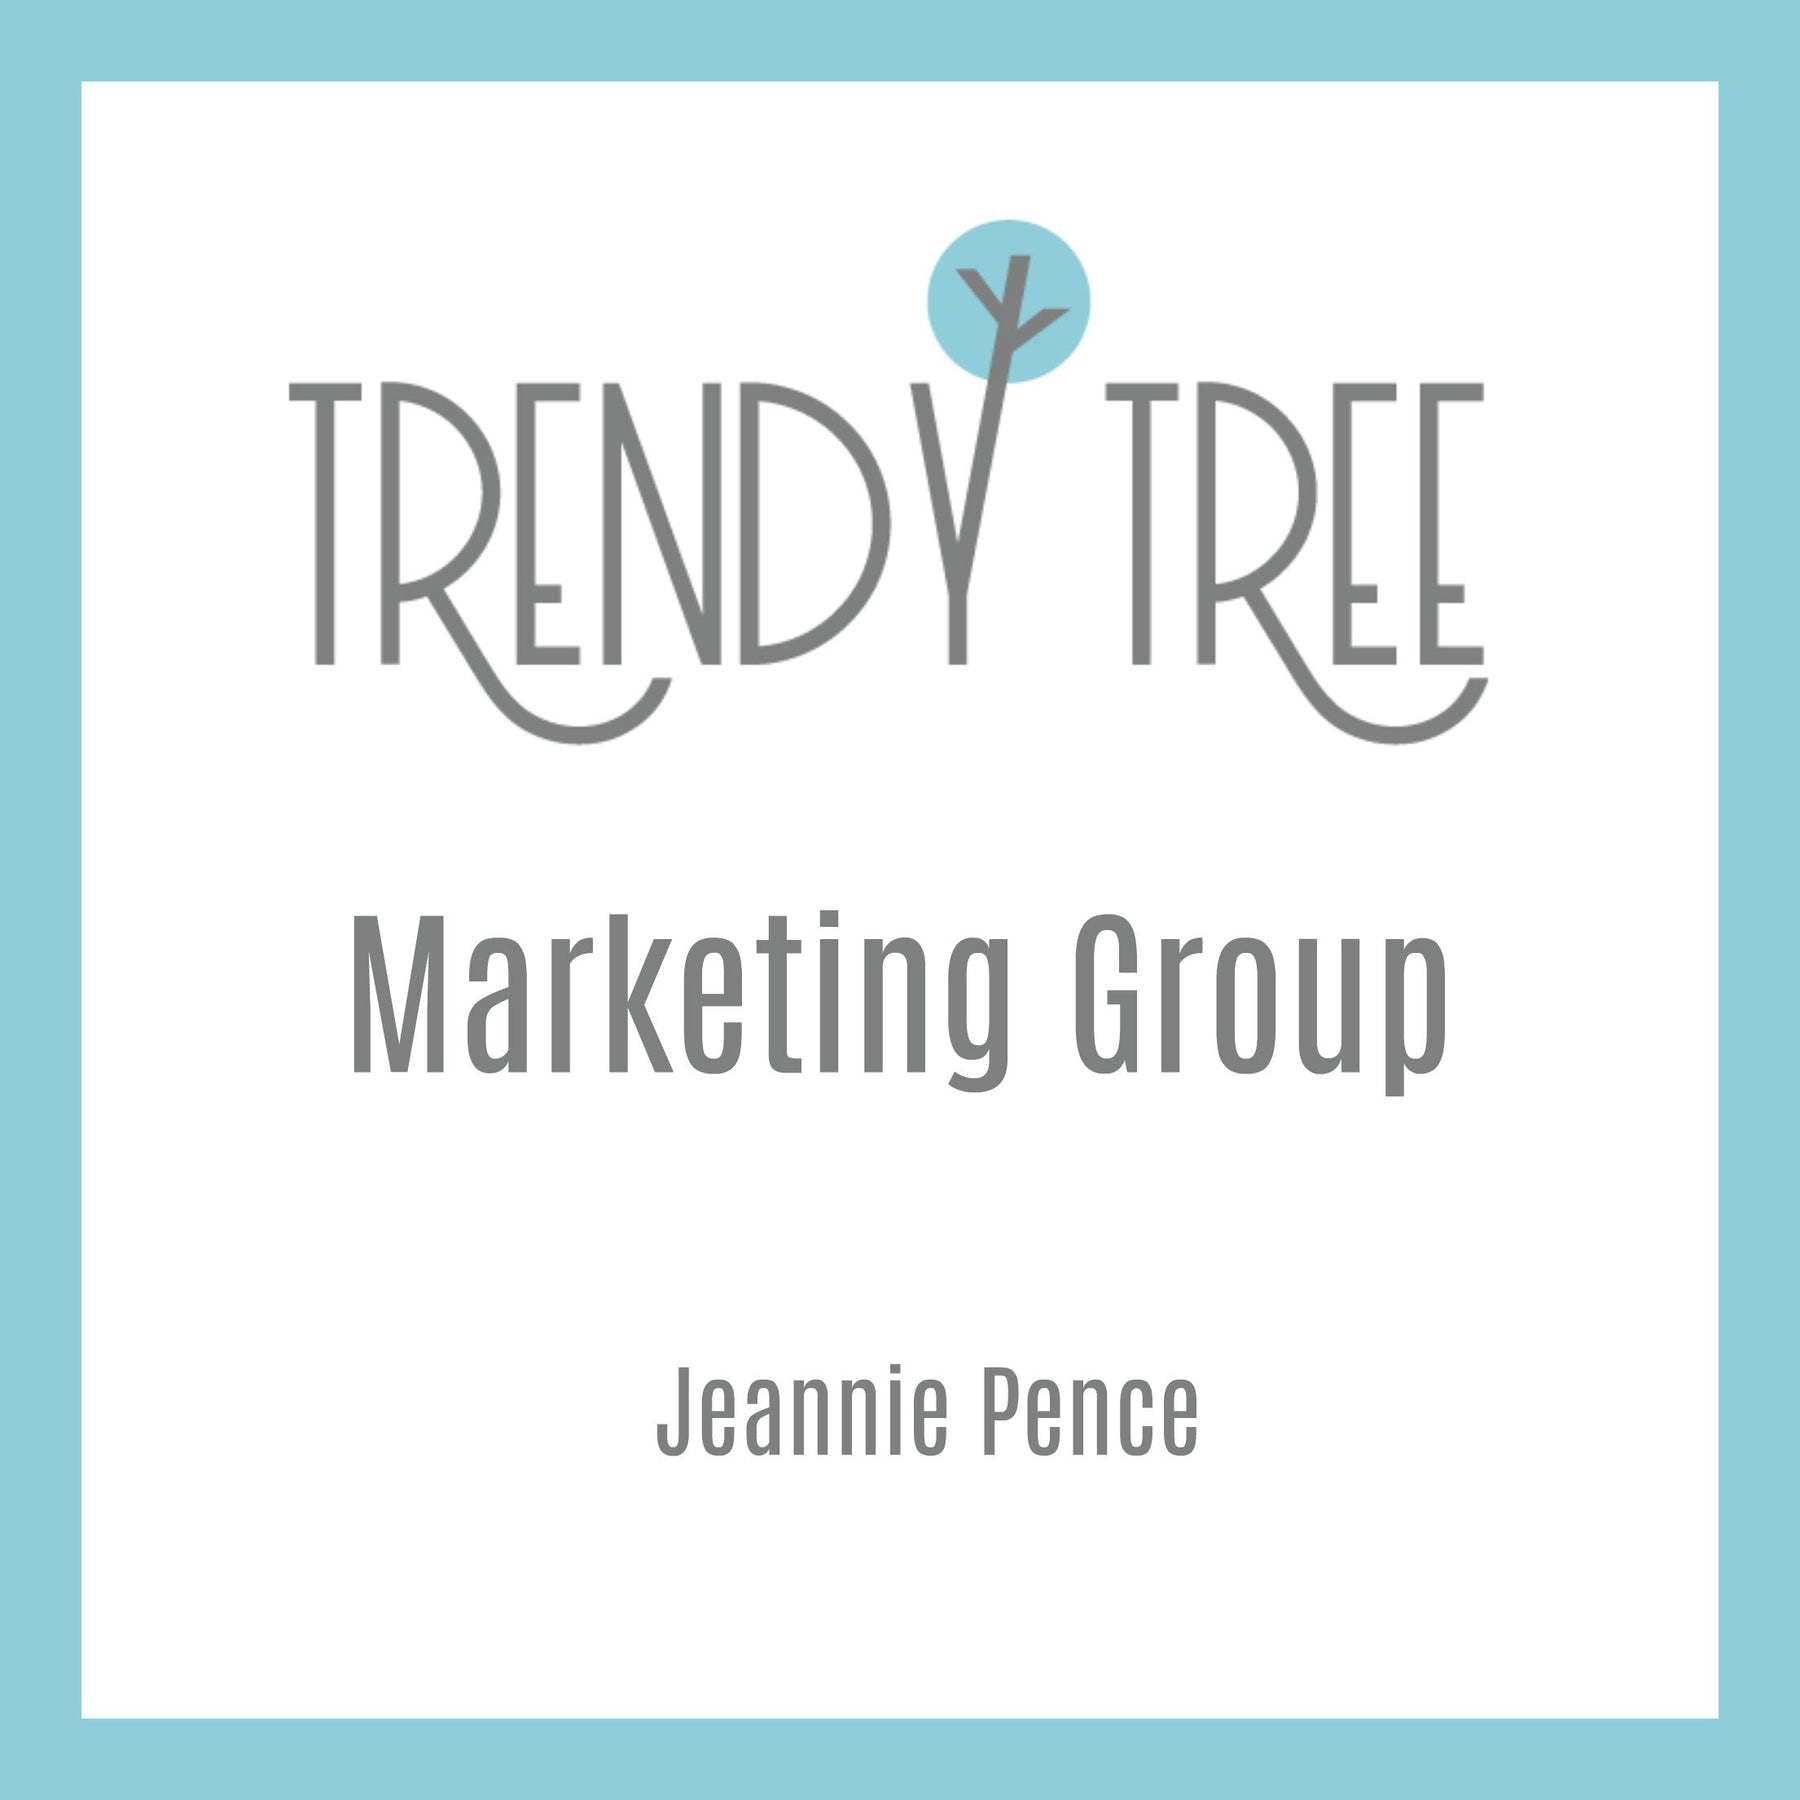 March Wreaths & Centerpieces by the Trendy Tree Marketing Group